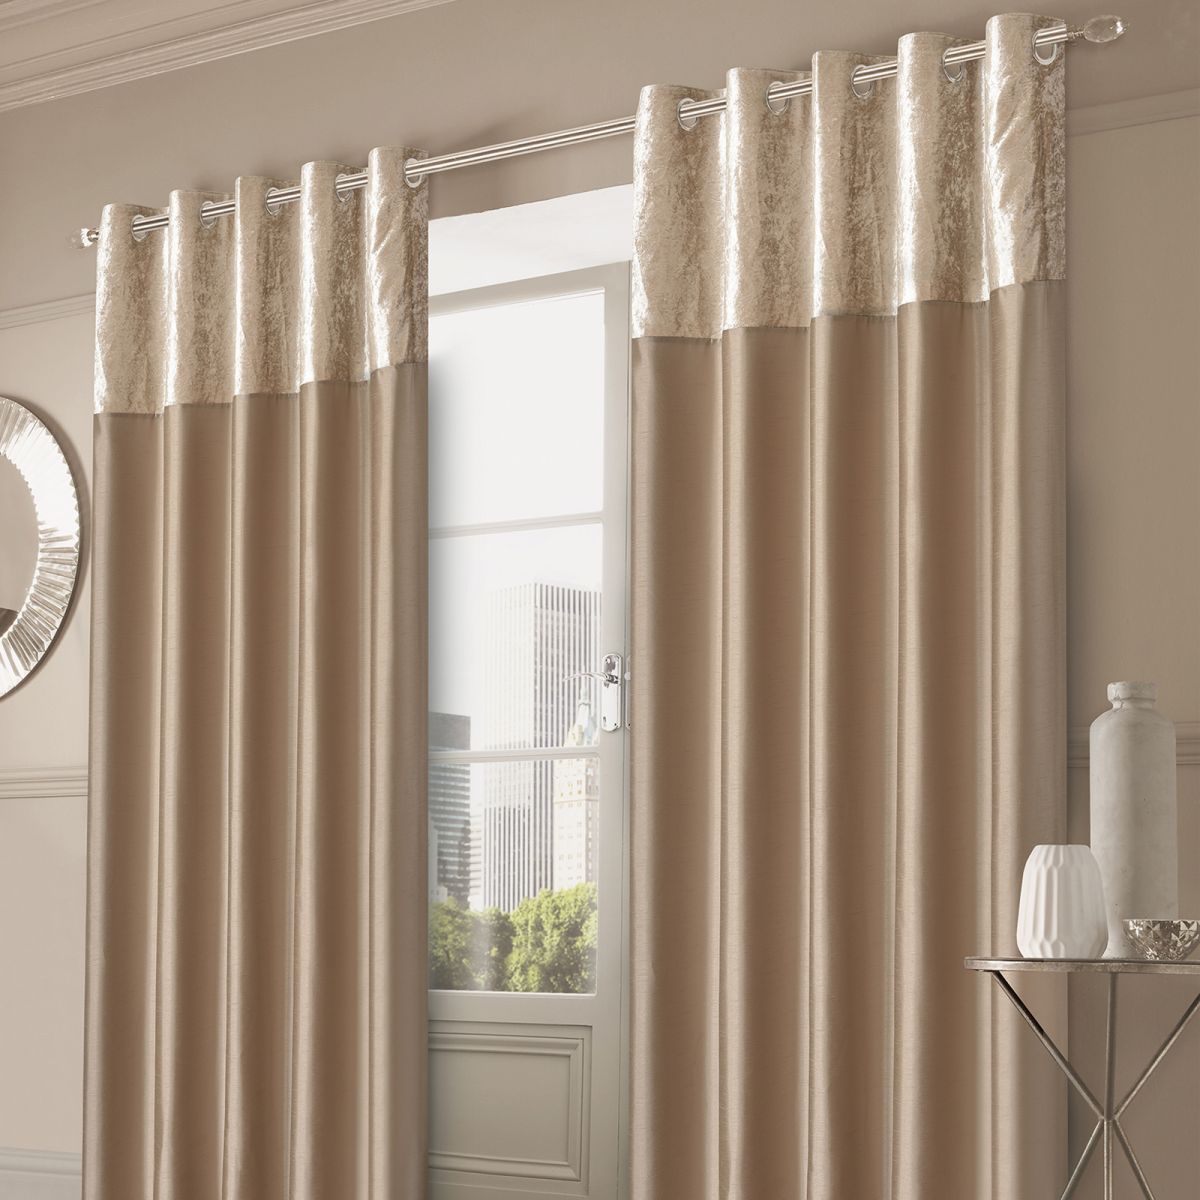 Sienna Home Crushed Velvet Band Eyelet Curtains, Gold - 90"x54"